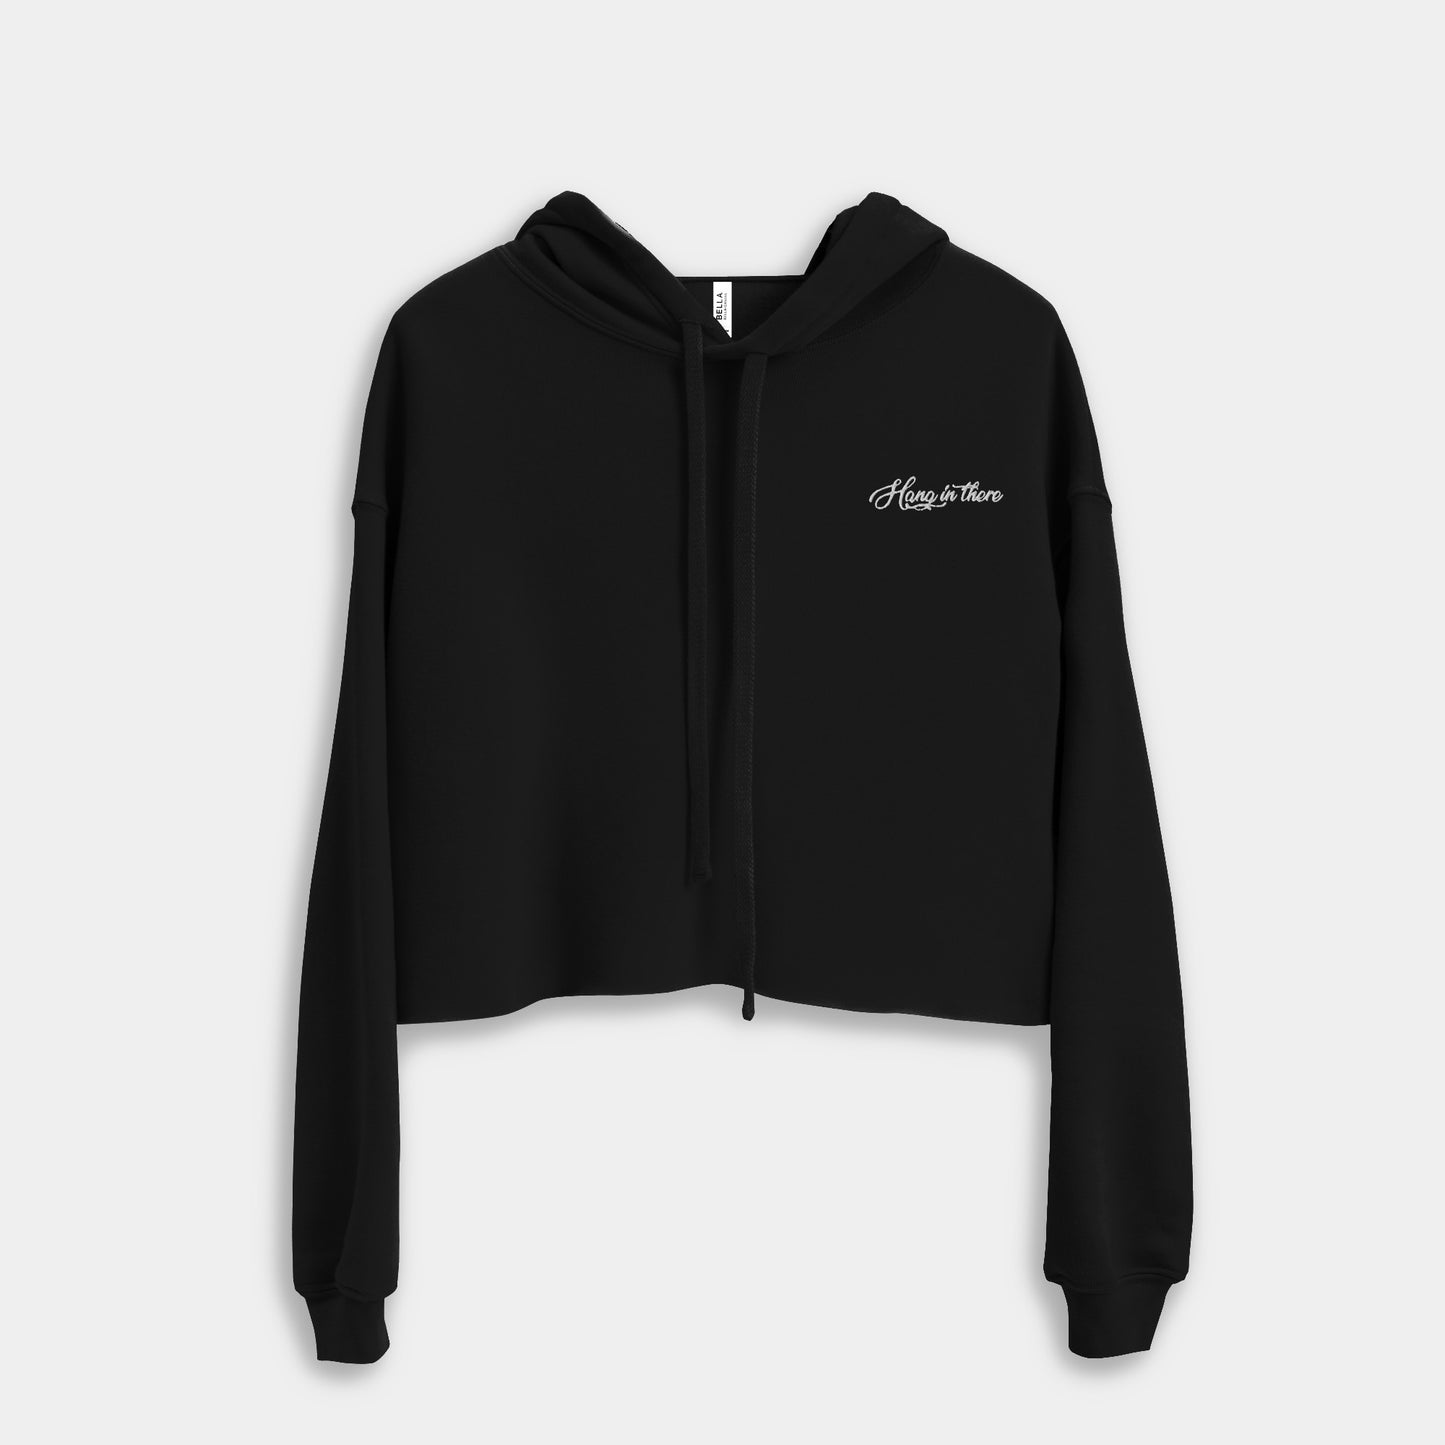 Hang in there Inspirational Cropped Hoodie